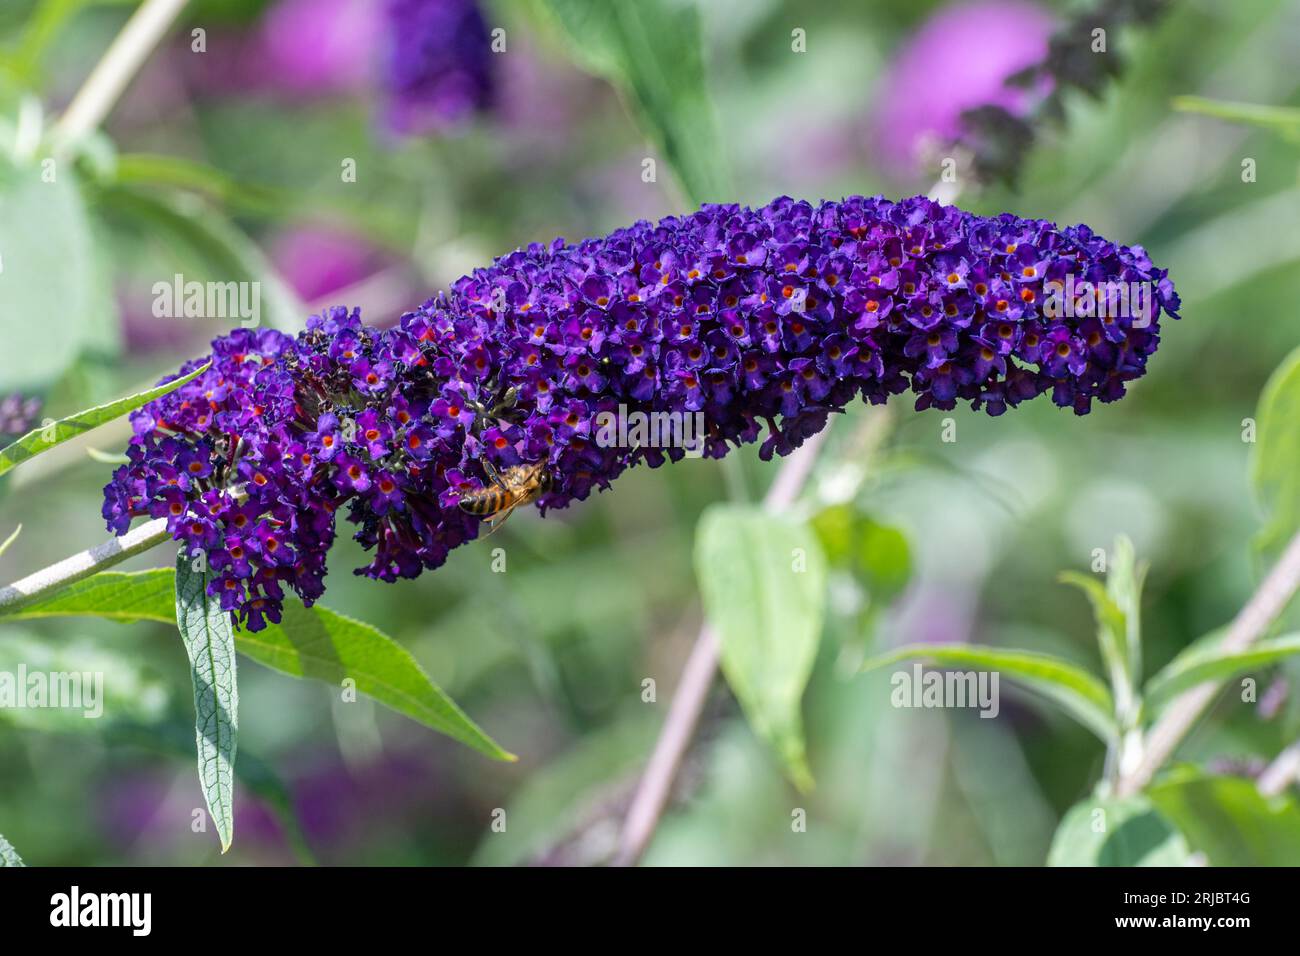 Deep purple flowers of Buddleja davidii 'Black Knight' (Buddleia variety), known as a butterfly bush, flowering in summer or august, England, UK Stock Photo